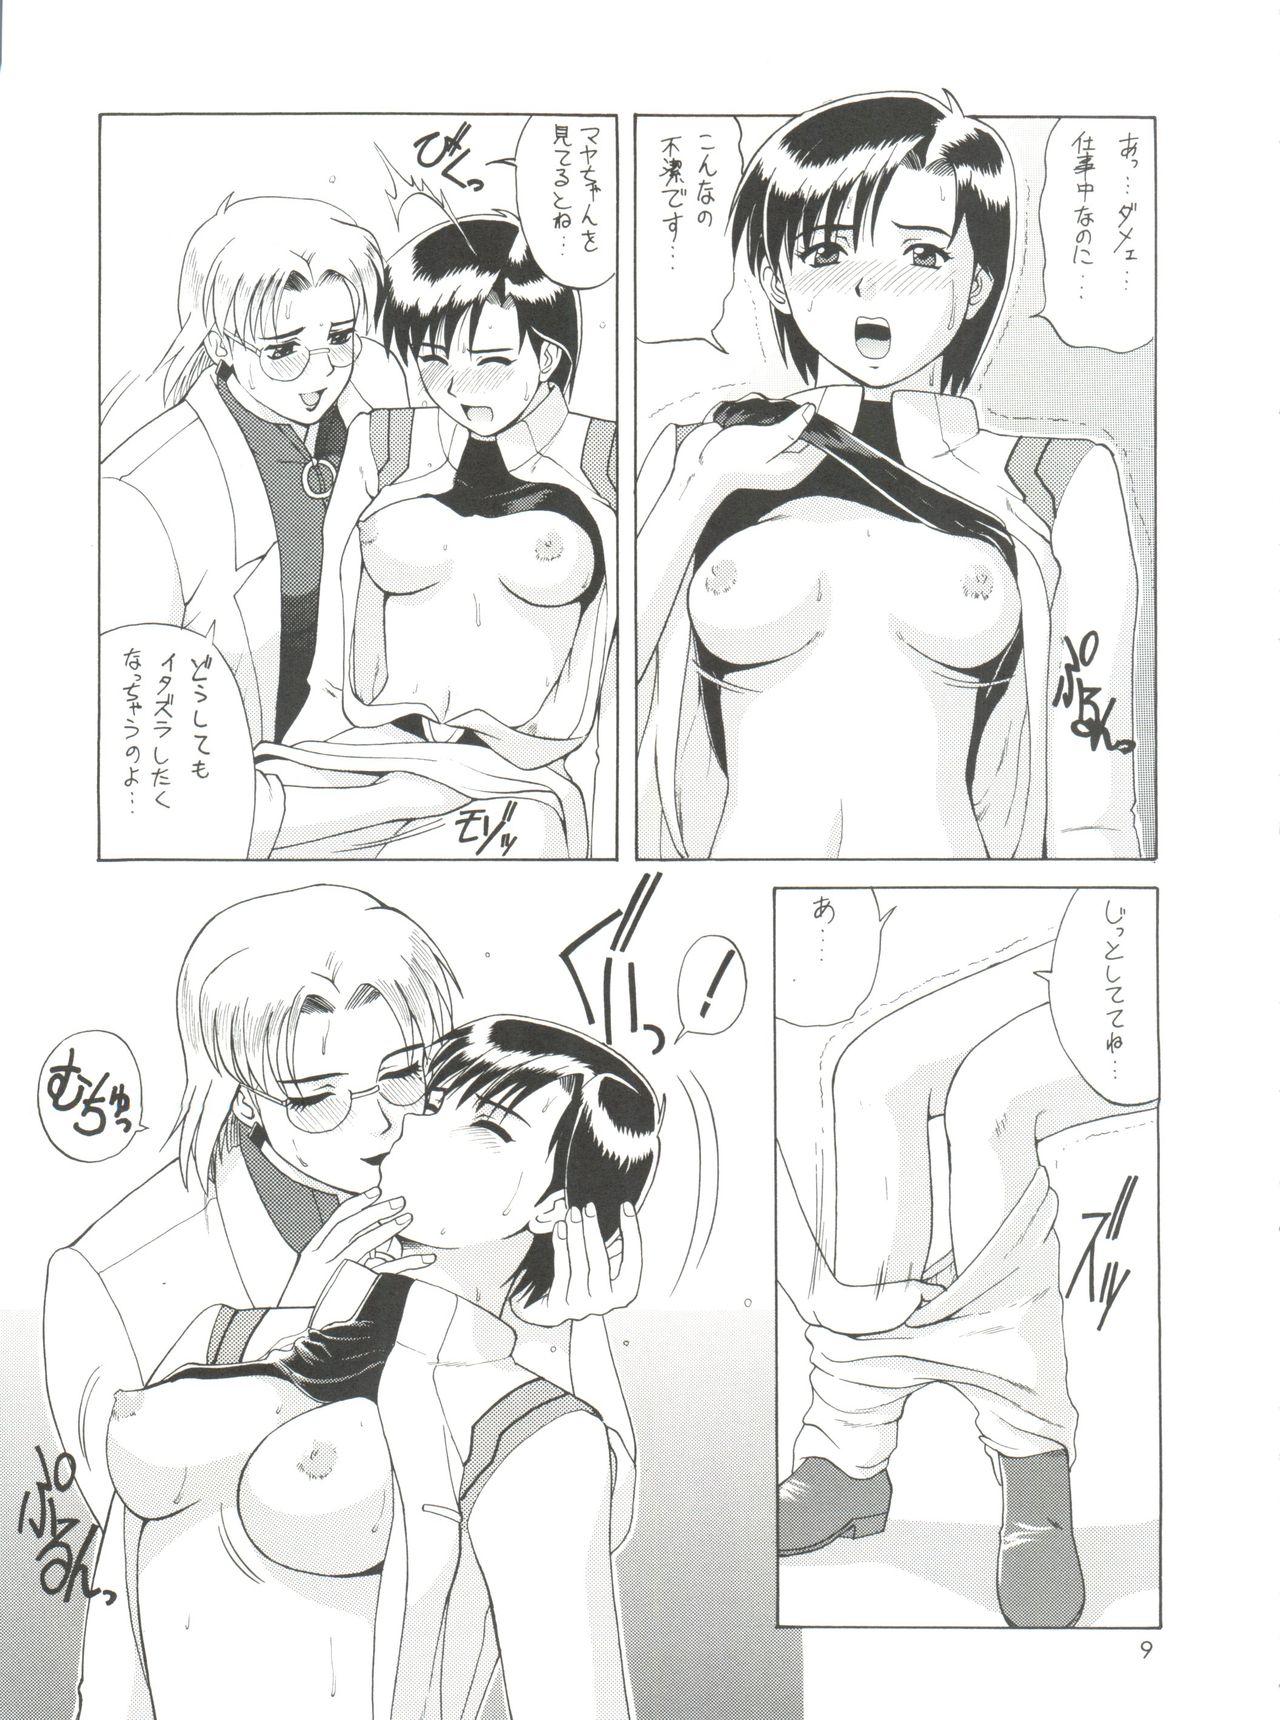 Staxxx Suite For My Sweet Shinteiban - Neon genesis evangelion Dick - Page 8